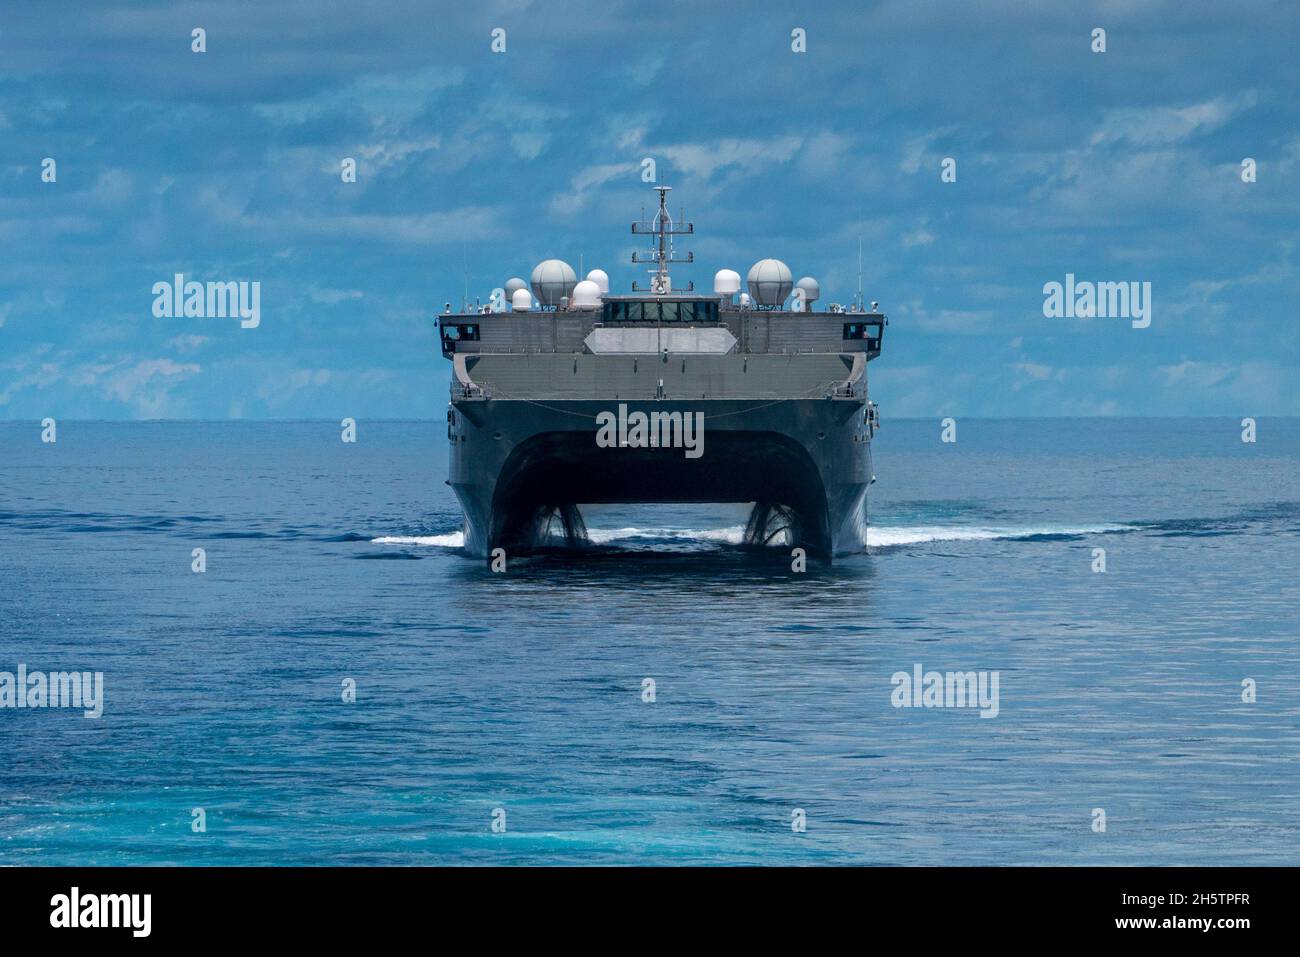 Java Sea, Indonesia. 09 November, 2021. The U.S. Navy Spearhead-class expeditionary fast transport USNS Millinocket during Cooperation Afloat and Readiness and Training with the Indonesian Navy November 9, 2021in the Java Sea.  Credit: MC3 Andrew Langholf/Planetpix/Alamy Live News Stock Photo